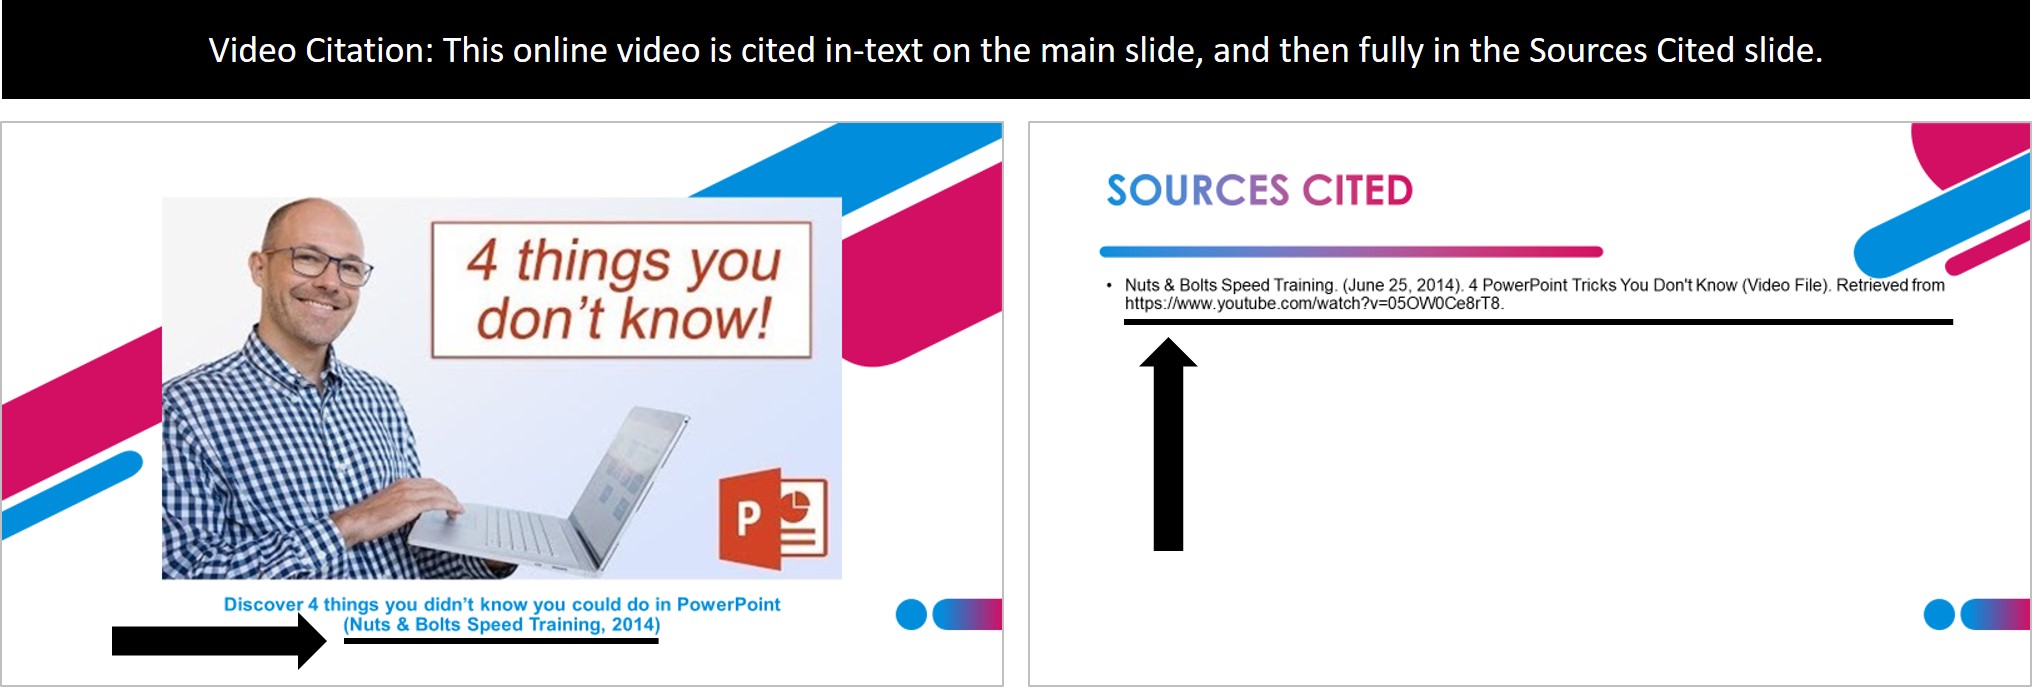 Example of a slide citing a YouTube video